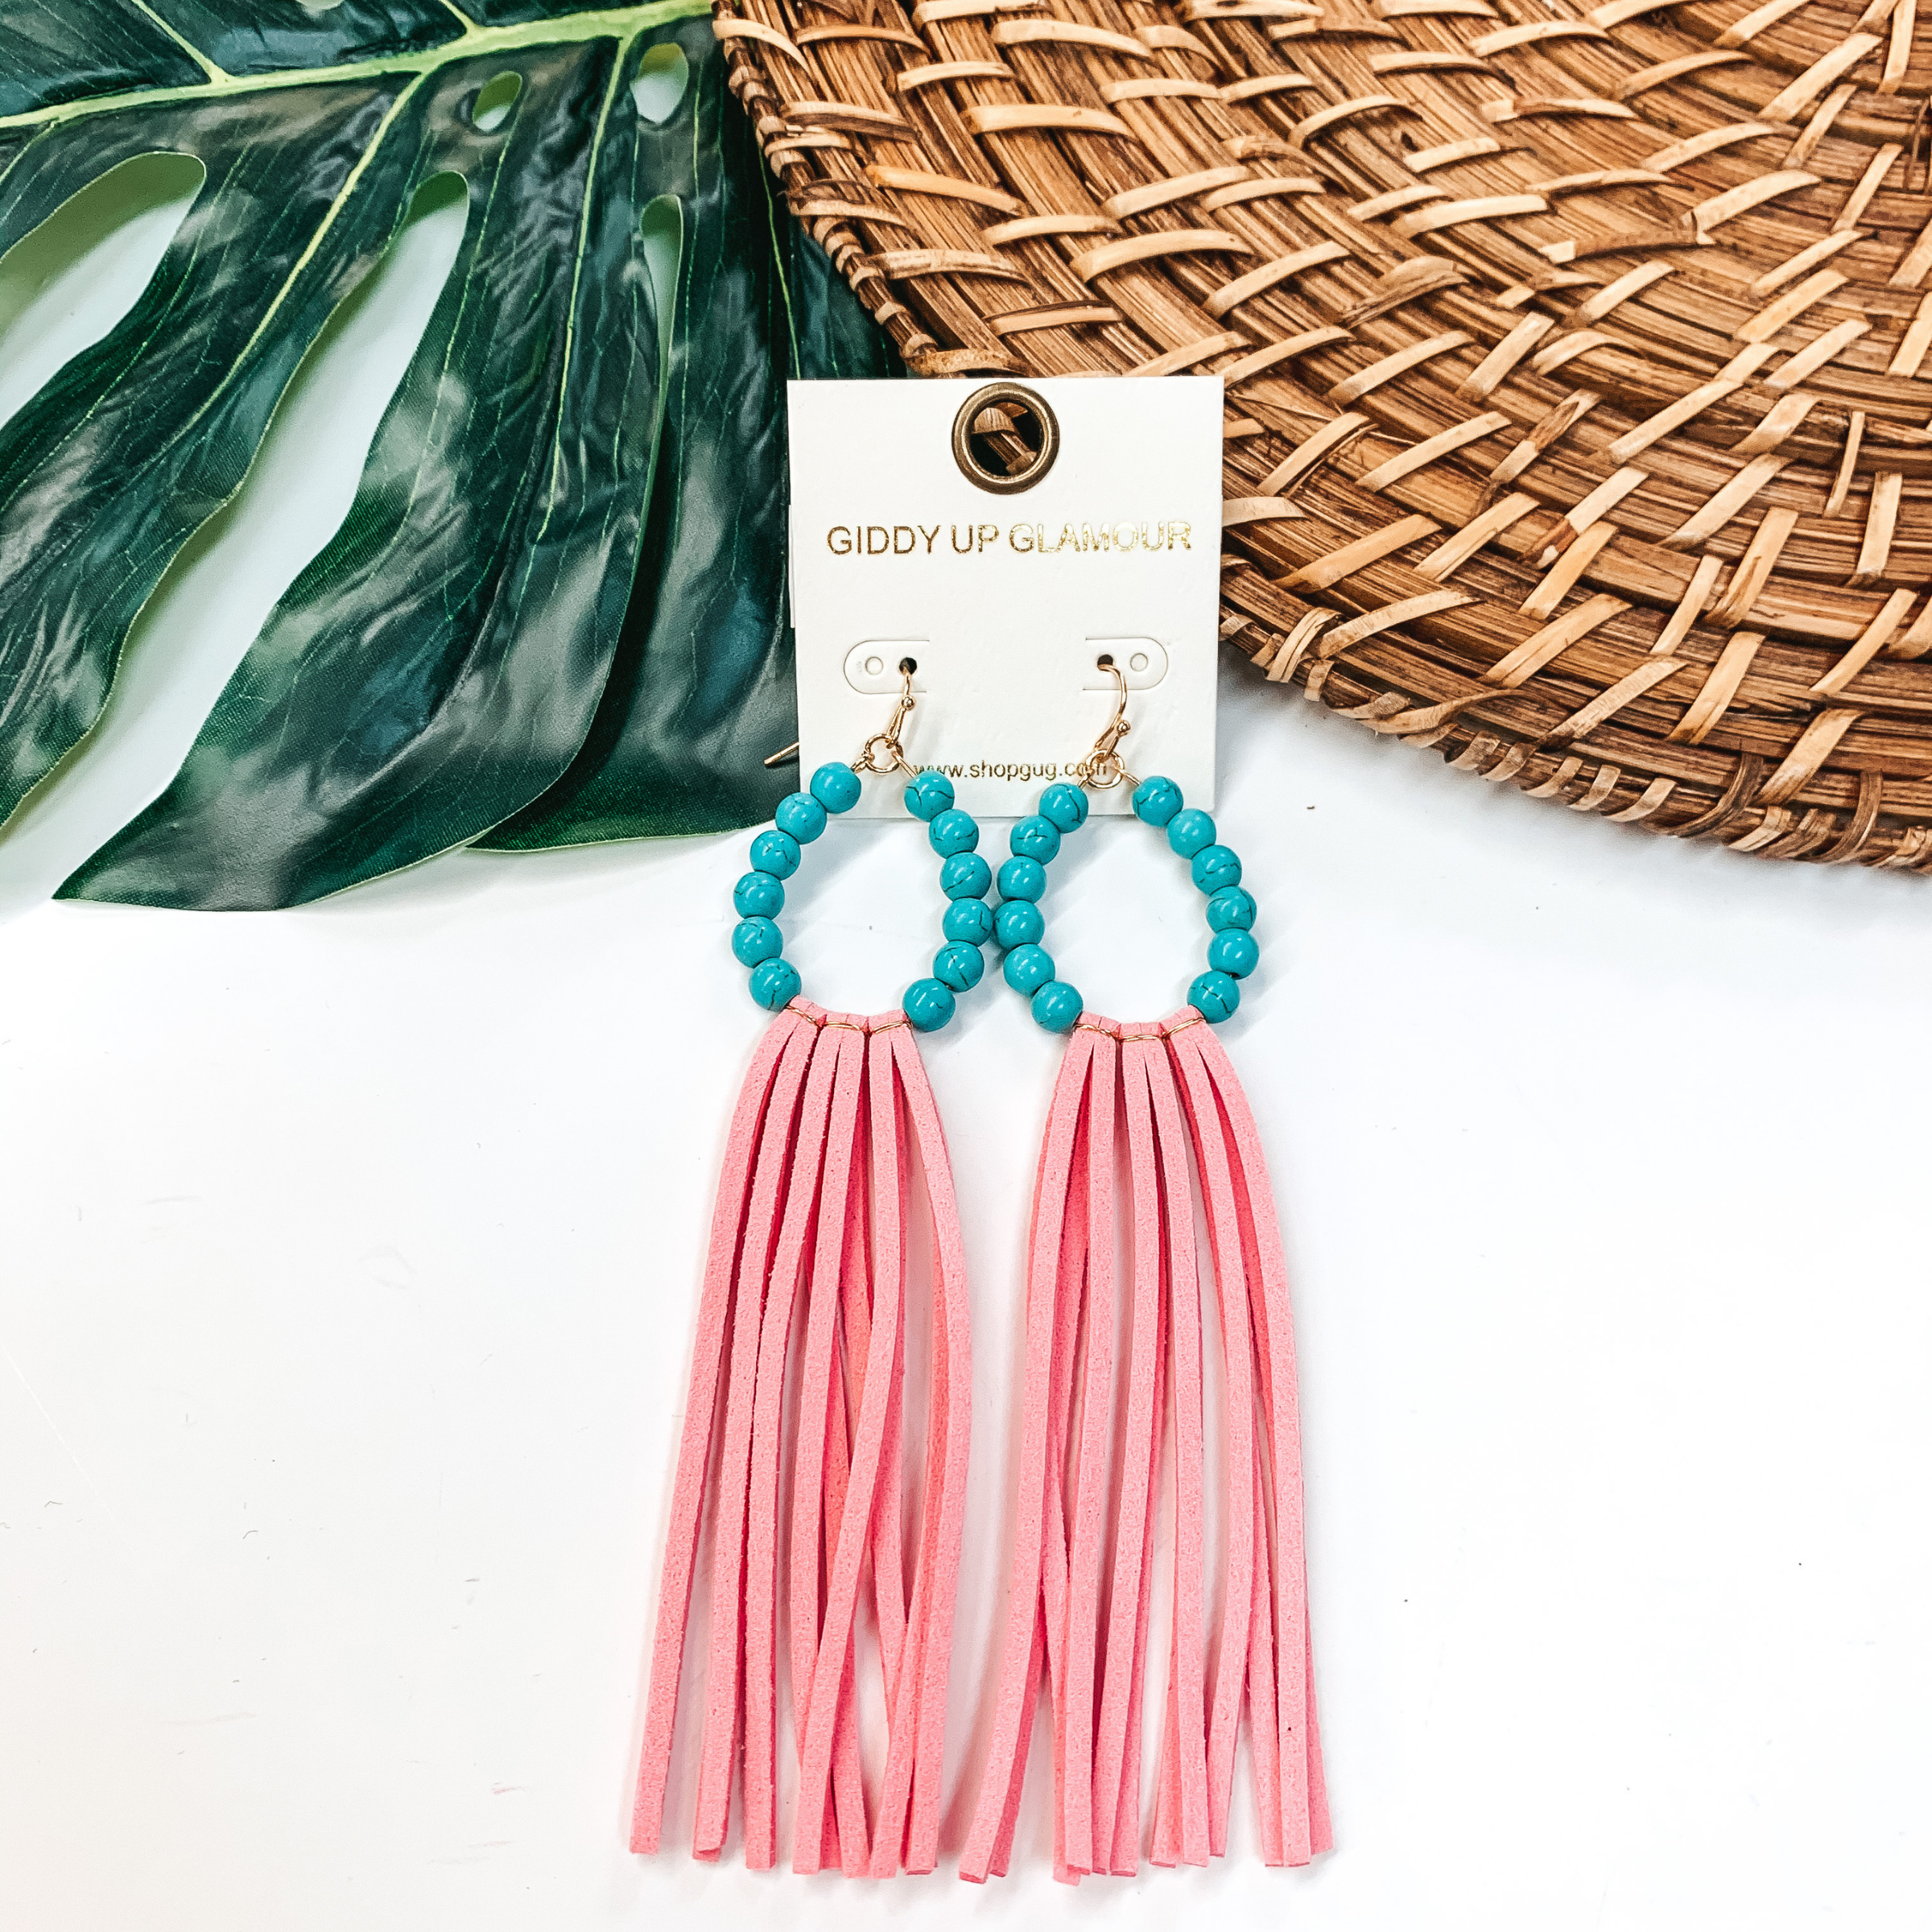 Turquoise Beaded Hoop Earrings with Pink Tassels - Giddy Up Glamour Boutique